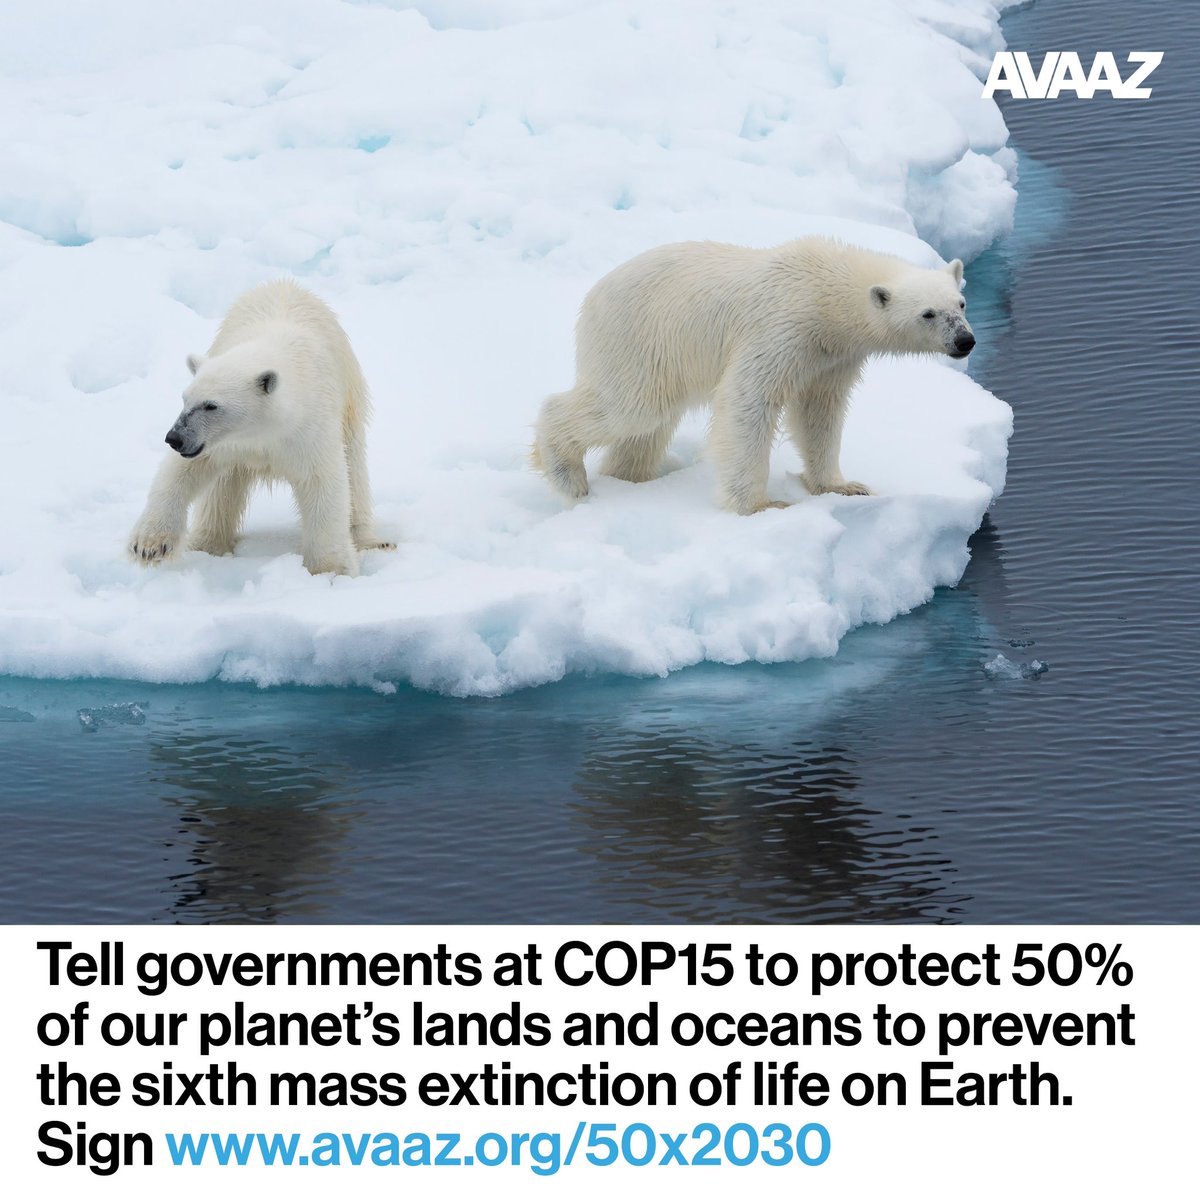 I just joined this call to conserve at least half of our lands and oceans so the planet and future generations have a chance. Join me by signing and sharing this @Avaaz petition: 
#NatureNeedsHalf #50x2030
avaaz.org/50x2030